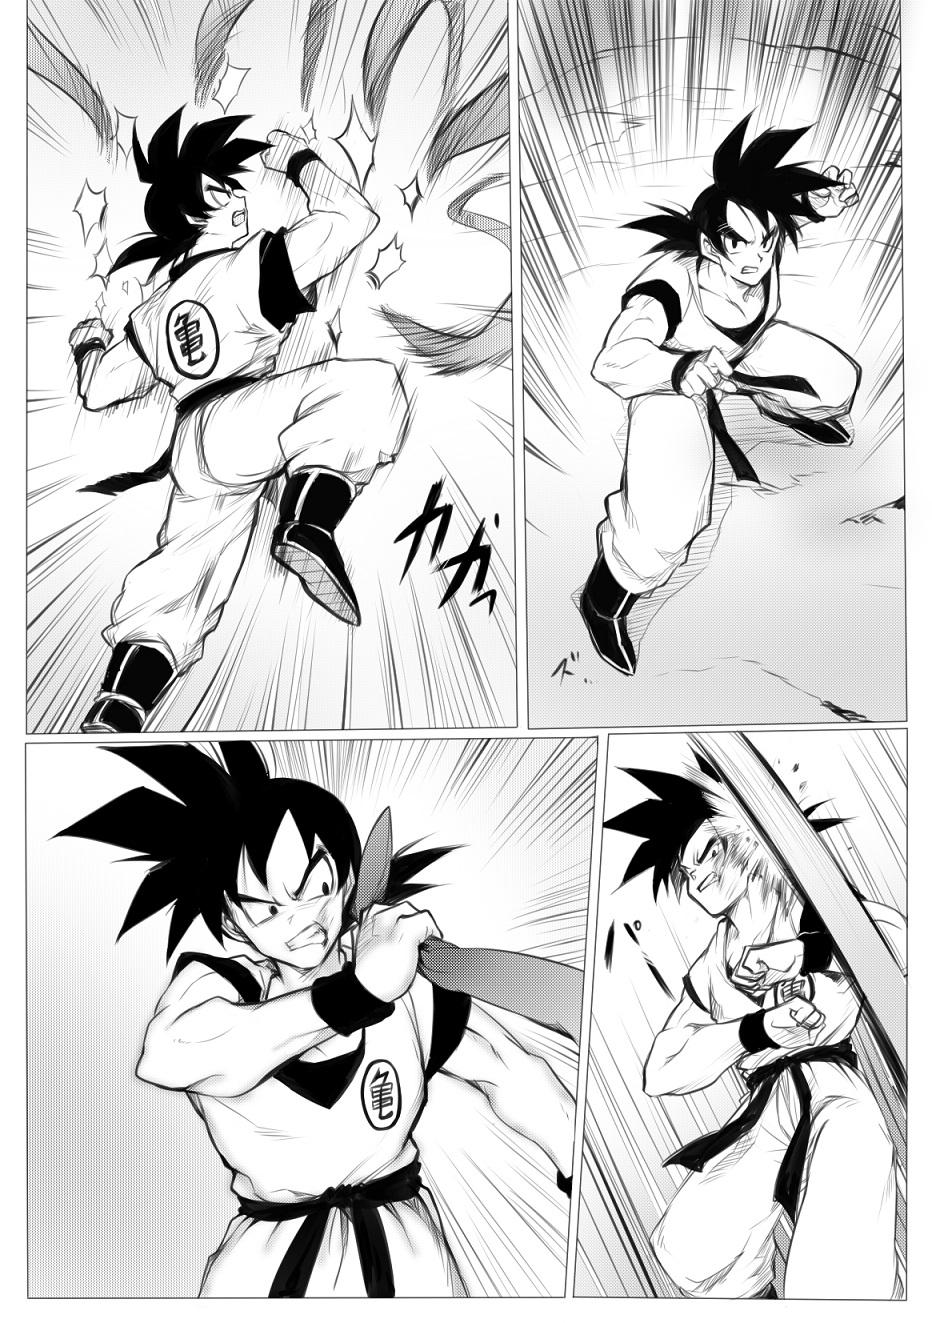 Longhair 接触 - Dragon ball z Soapy Massage - Page 8